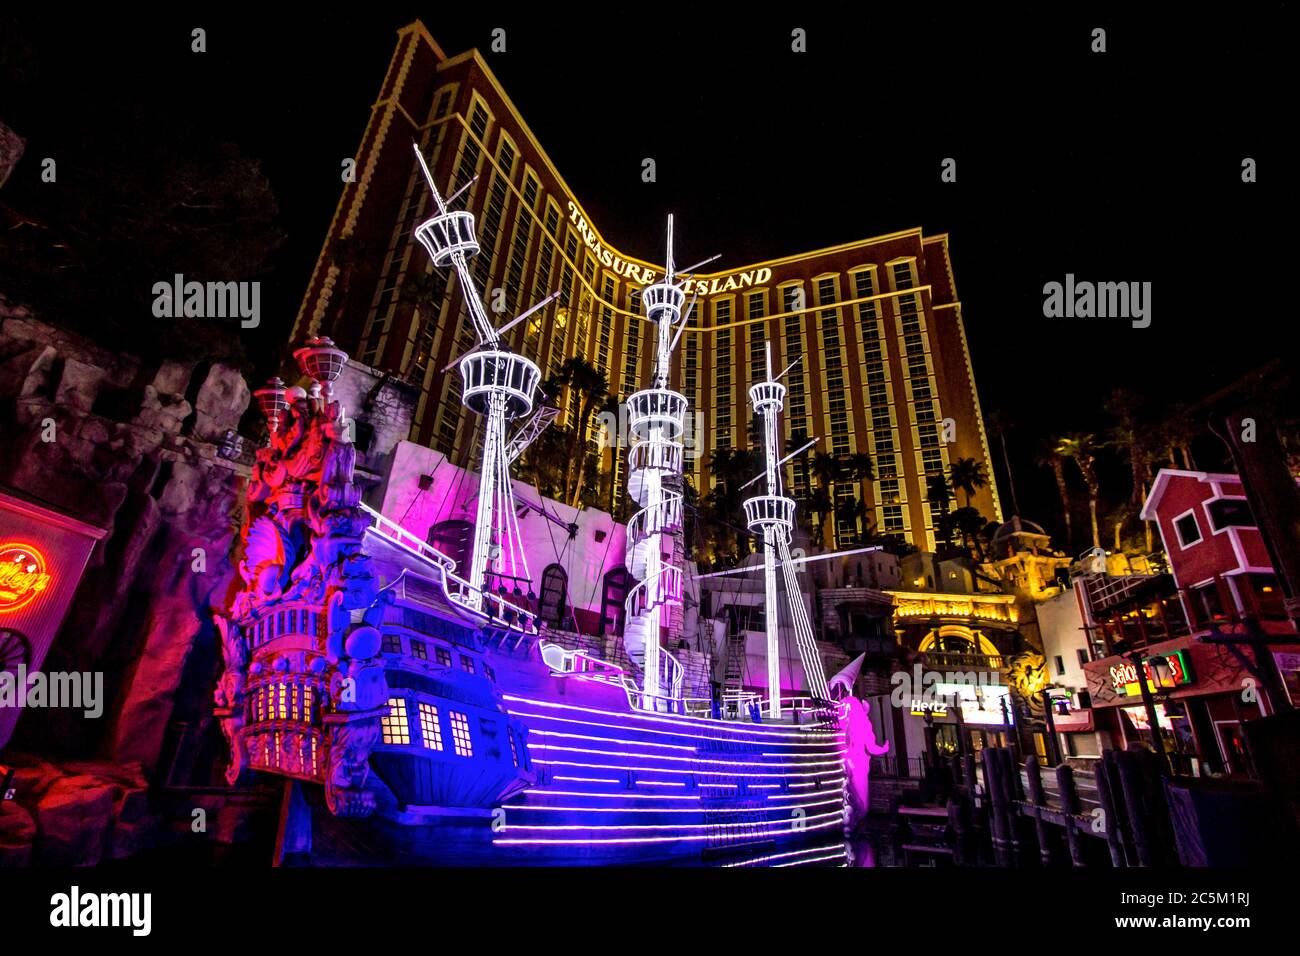 Las Vegas, Nevada, USA - February 20, 2020: Illuminated exterior of the Treasure Island Hotel and Casino completed with pirate ship in Las Vegas Stock Photo